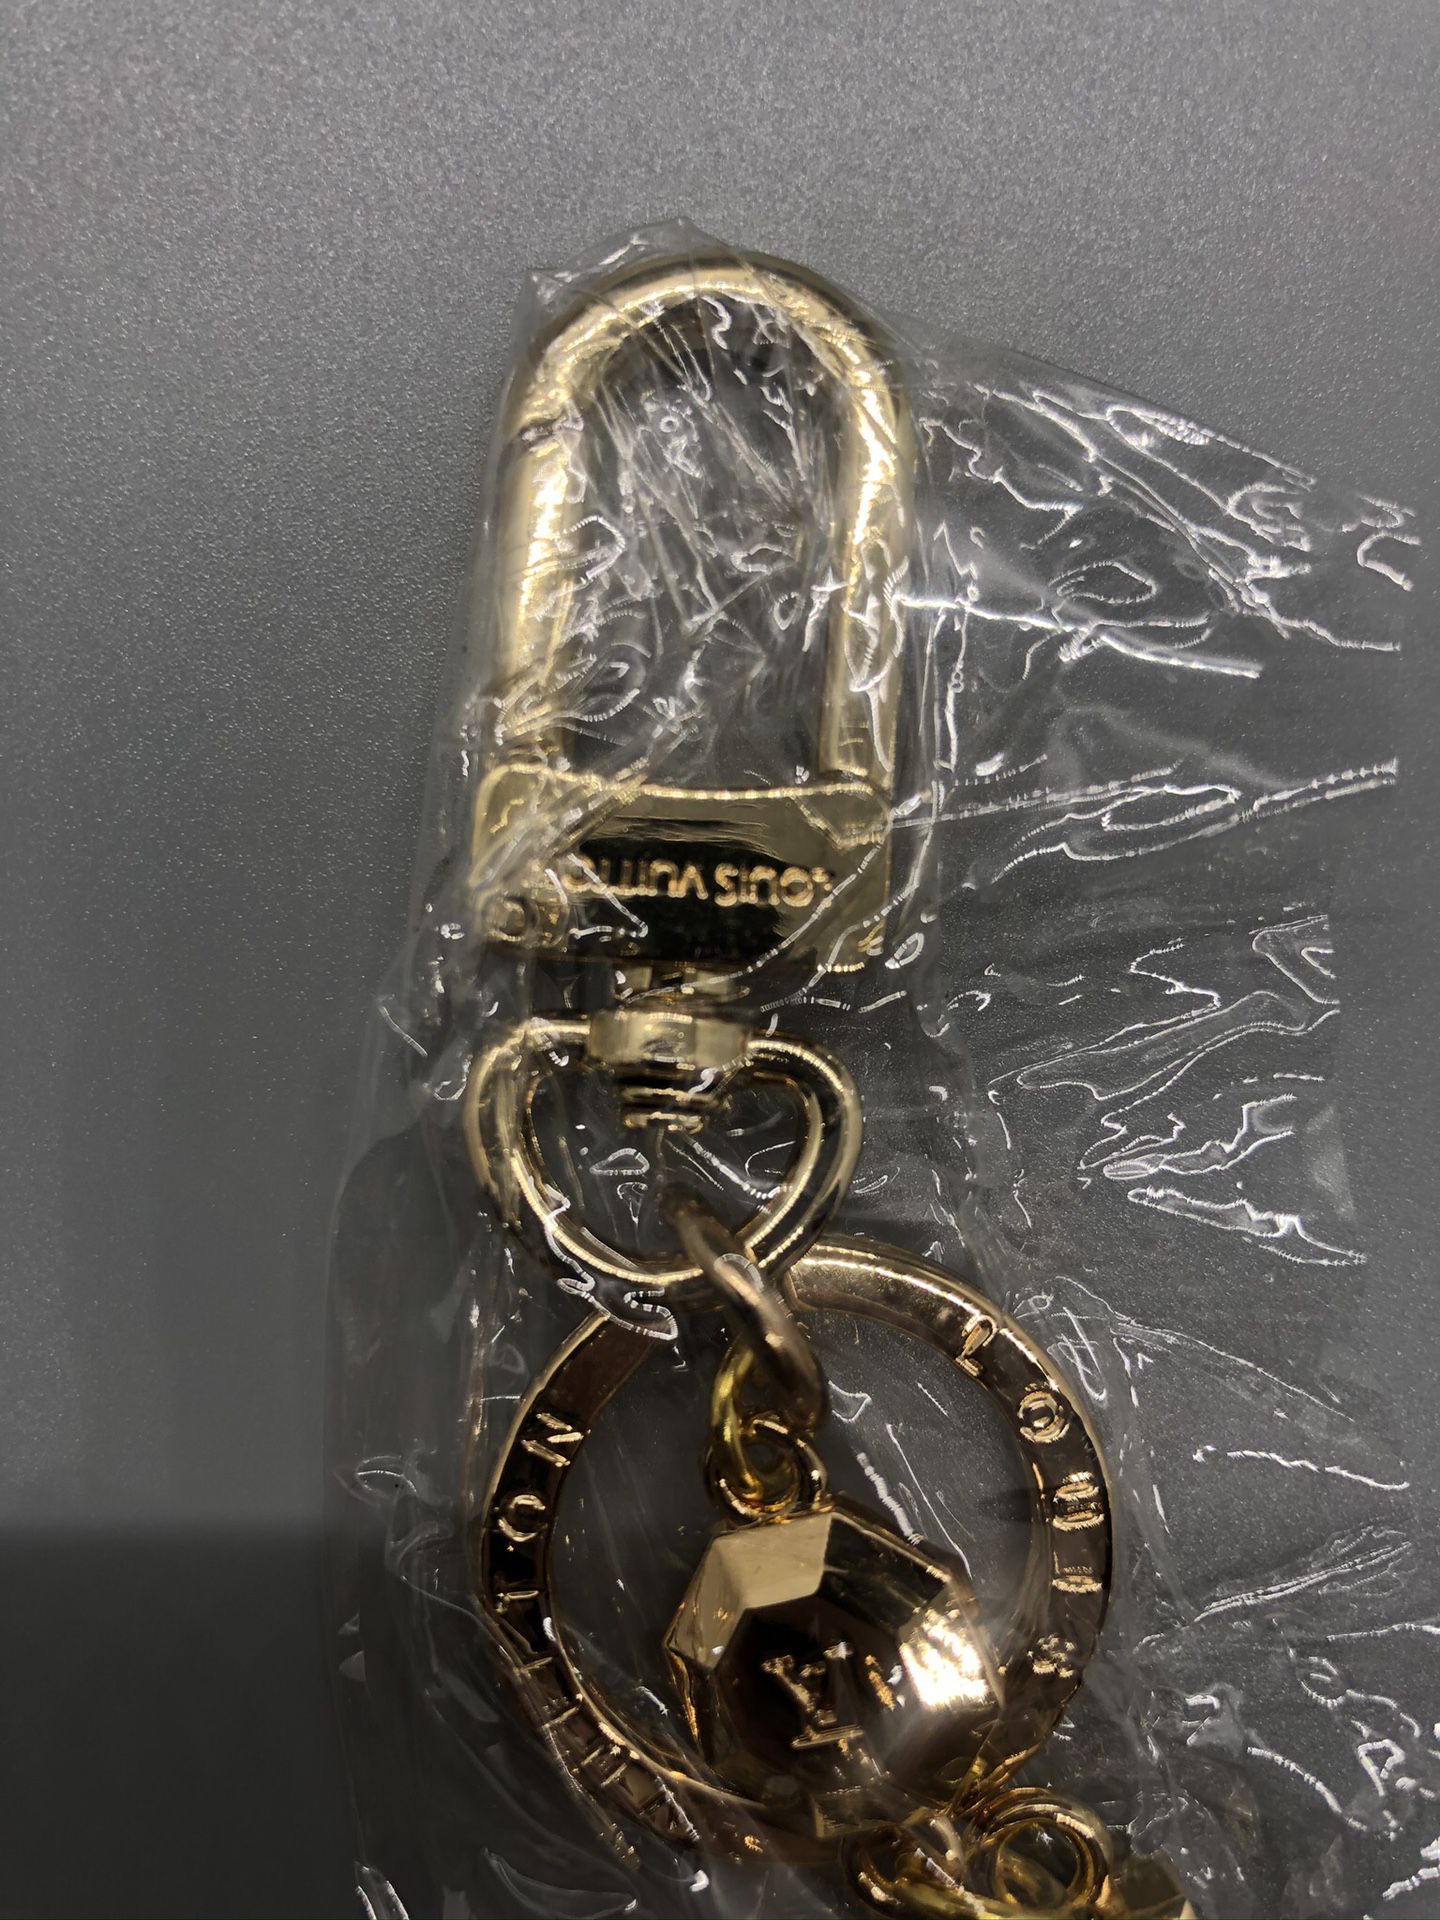 Louis Vuitton Spaceman Metal Charm/Keychain for Sale in Queens, NY - OfferUp